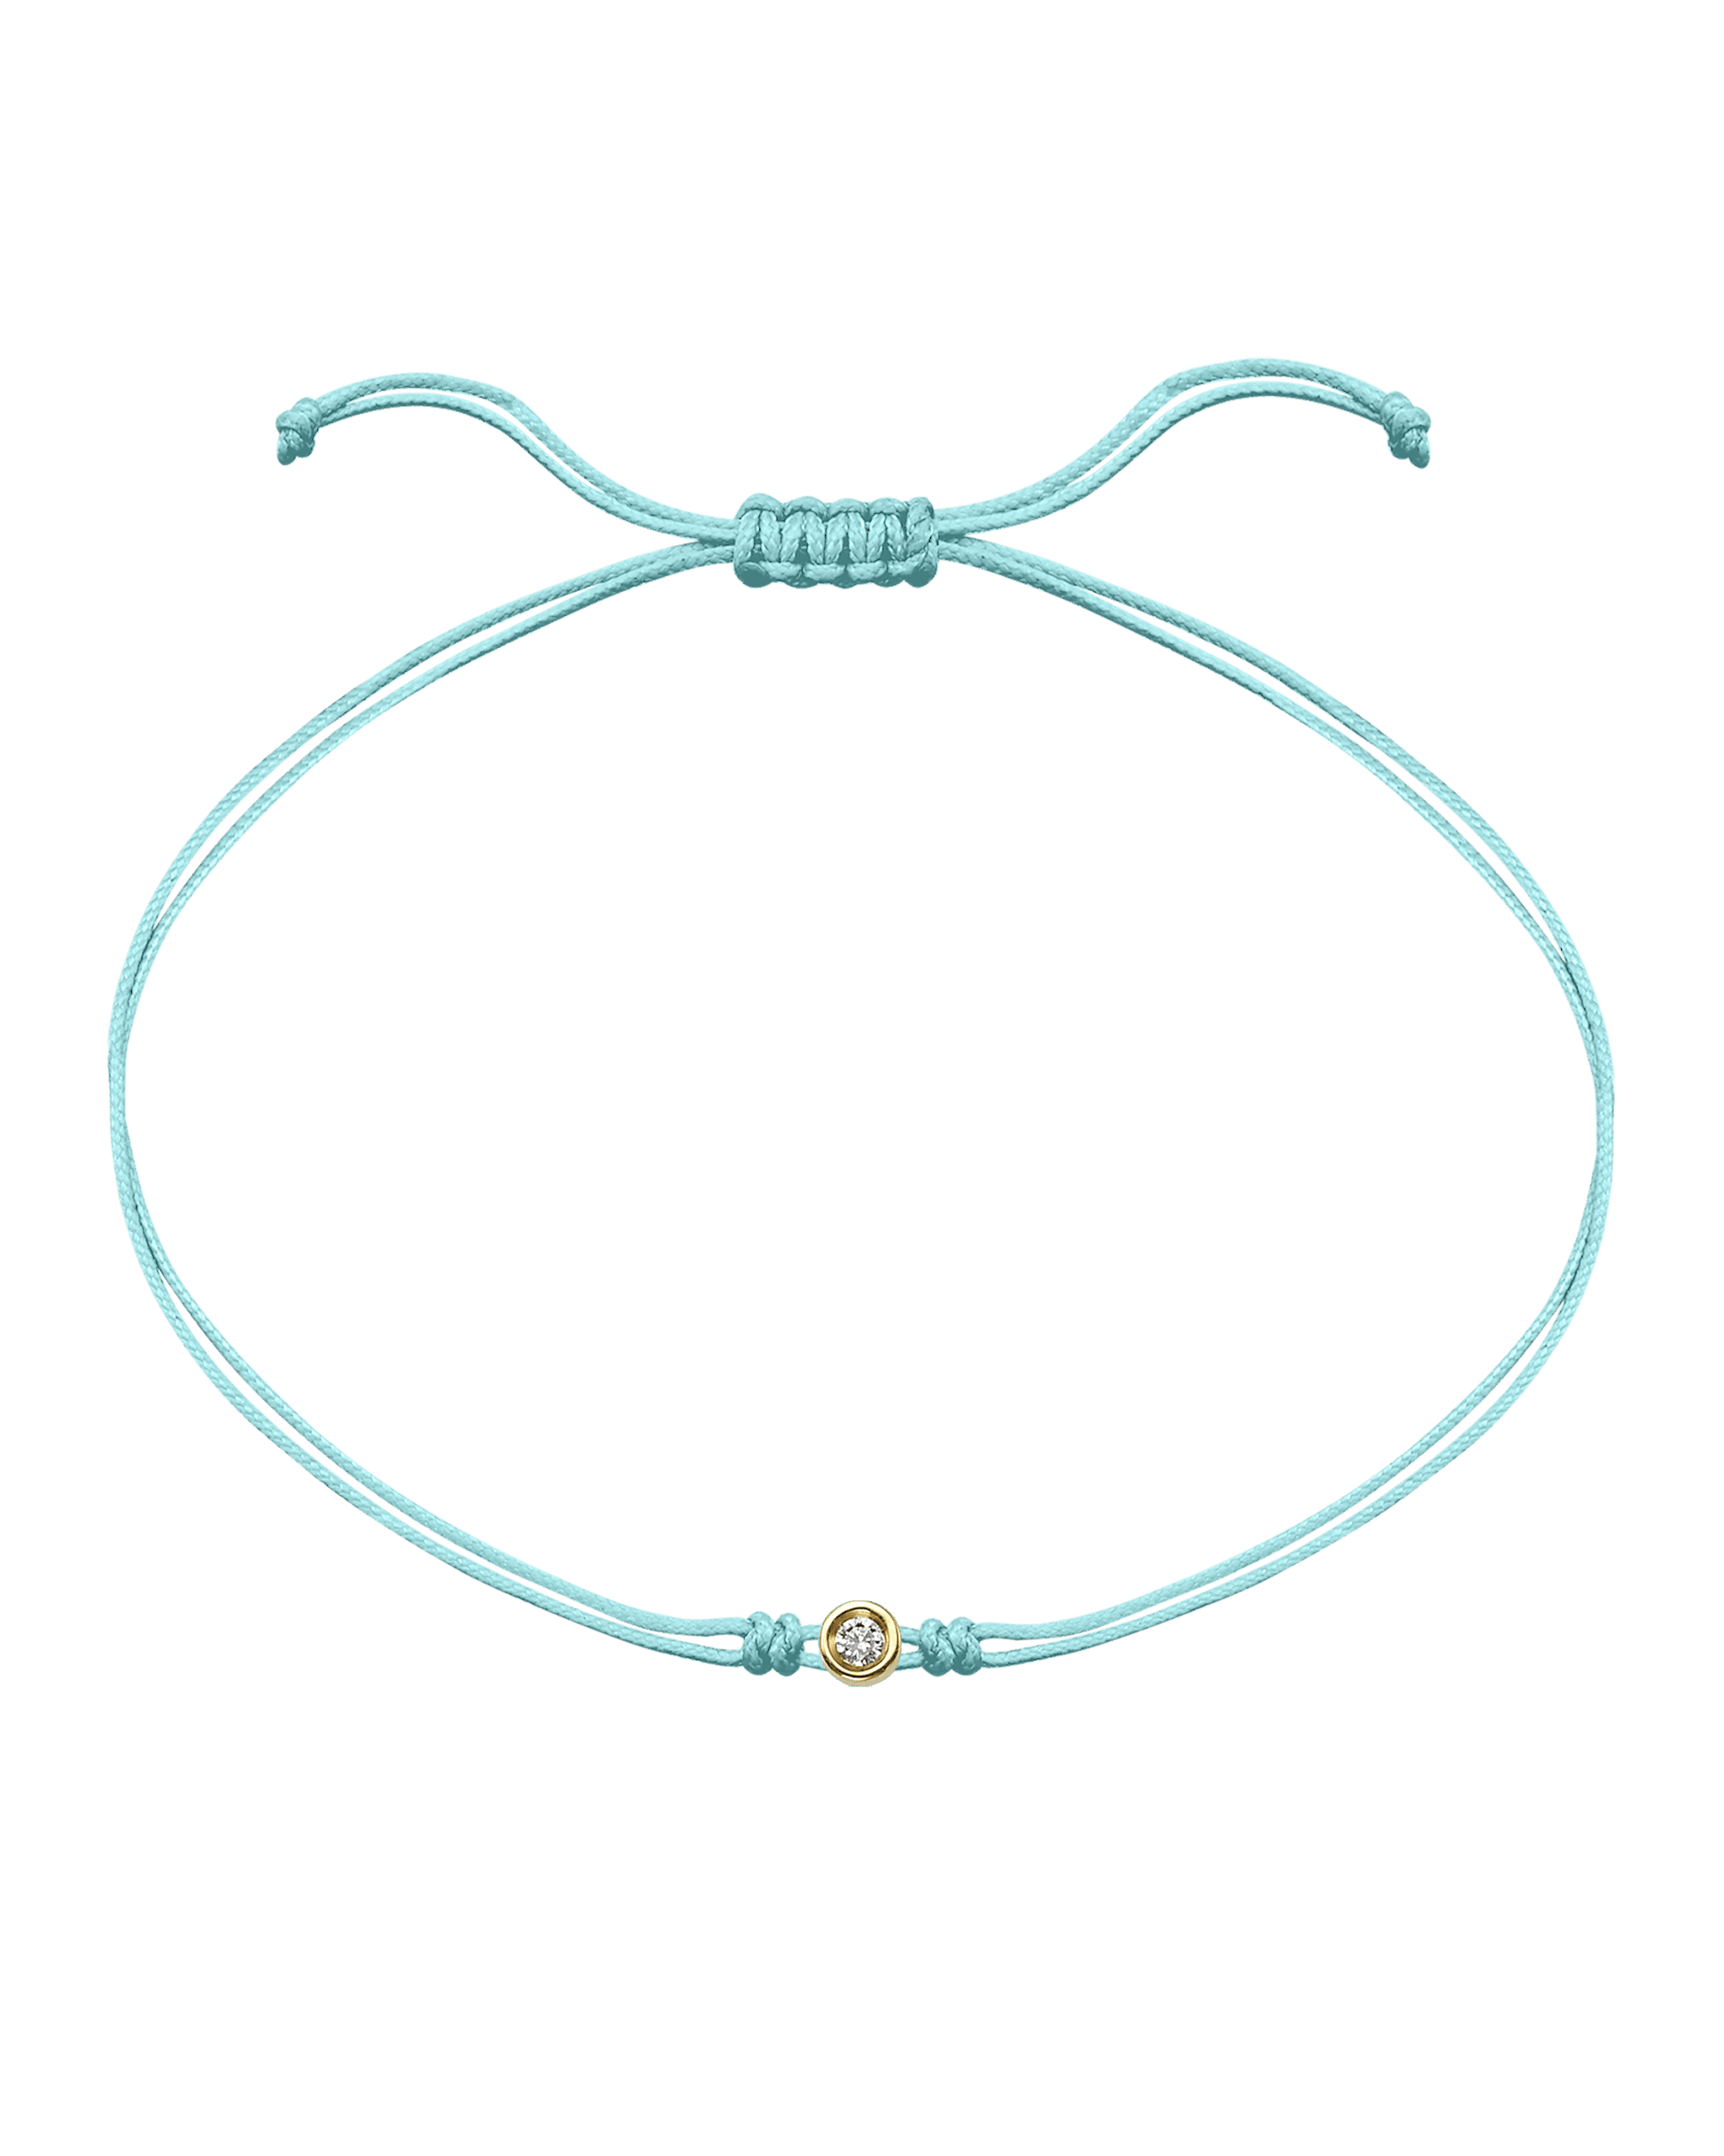 Summer Edition : The Classic String of Love - 14K Yellow Gold Bracelets magal-dev Frozen Blue Daiquiri - Turquoise Small: 0.03ct 